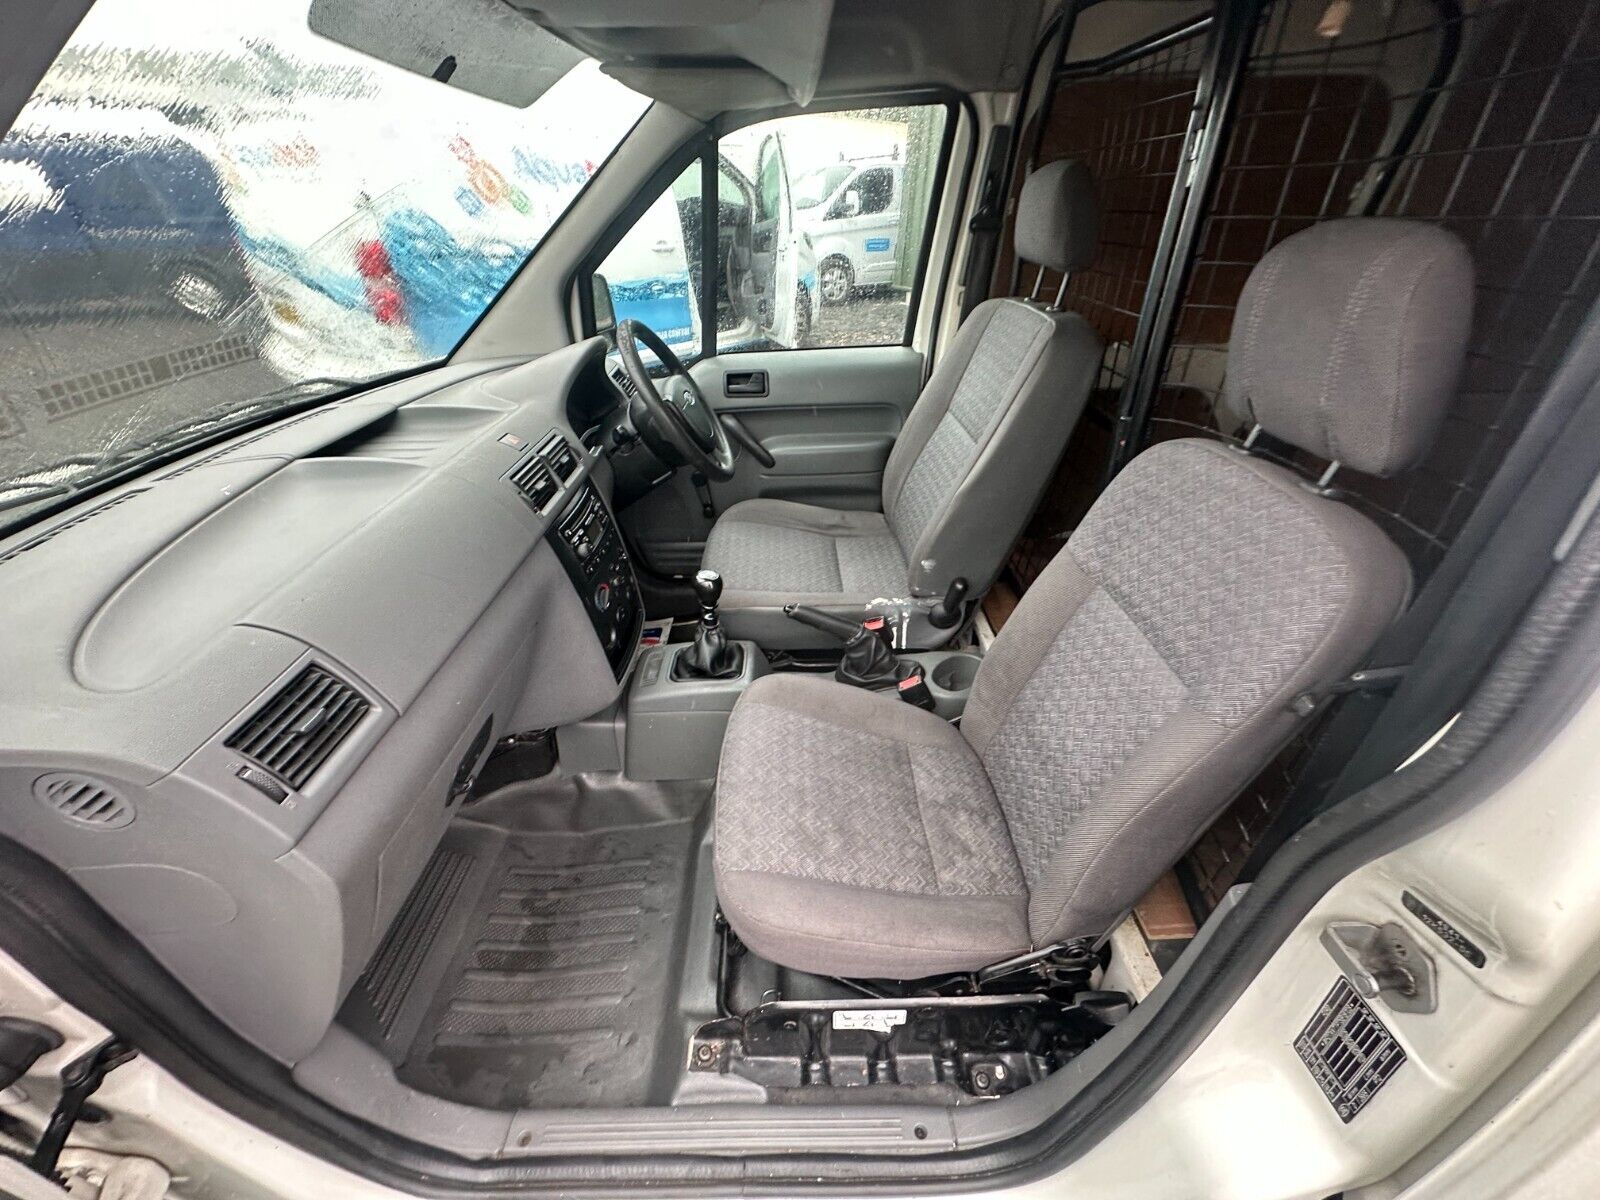 Bid on CLEAN INTERIOR, SHINY ALLOYS: 2005 FORD TRANSIT CONNECT (NO VAT ON HAMMER)- Buy &amp; Sell on Auction with EAMA Group